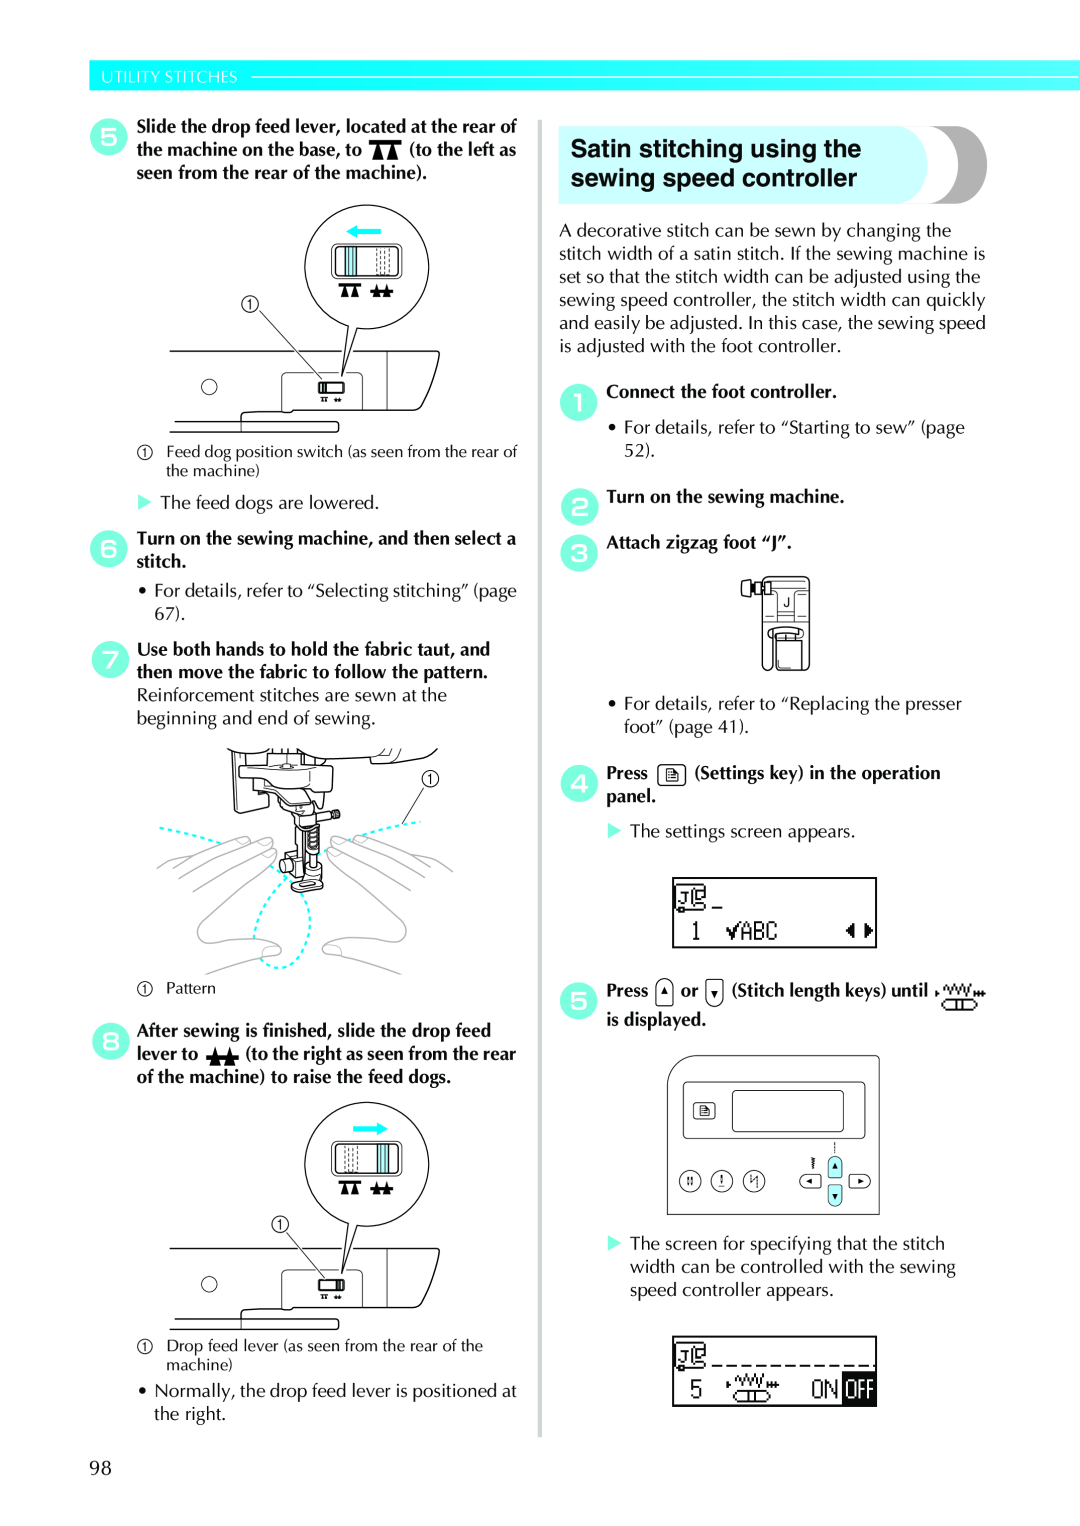 Brother Sewing Machines operation manual Satin stitching using the sewing speed controller, Utility Stitches 